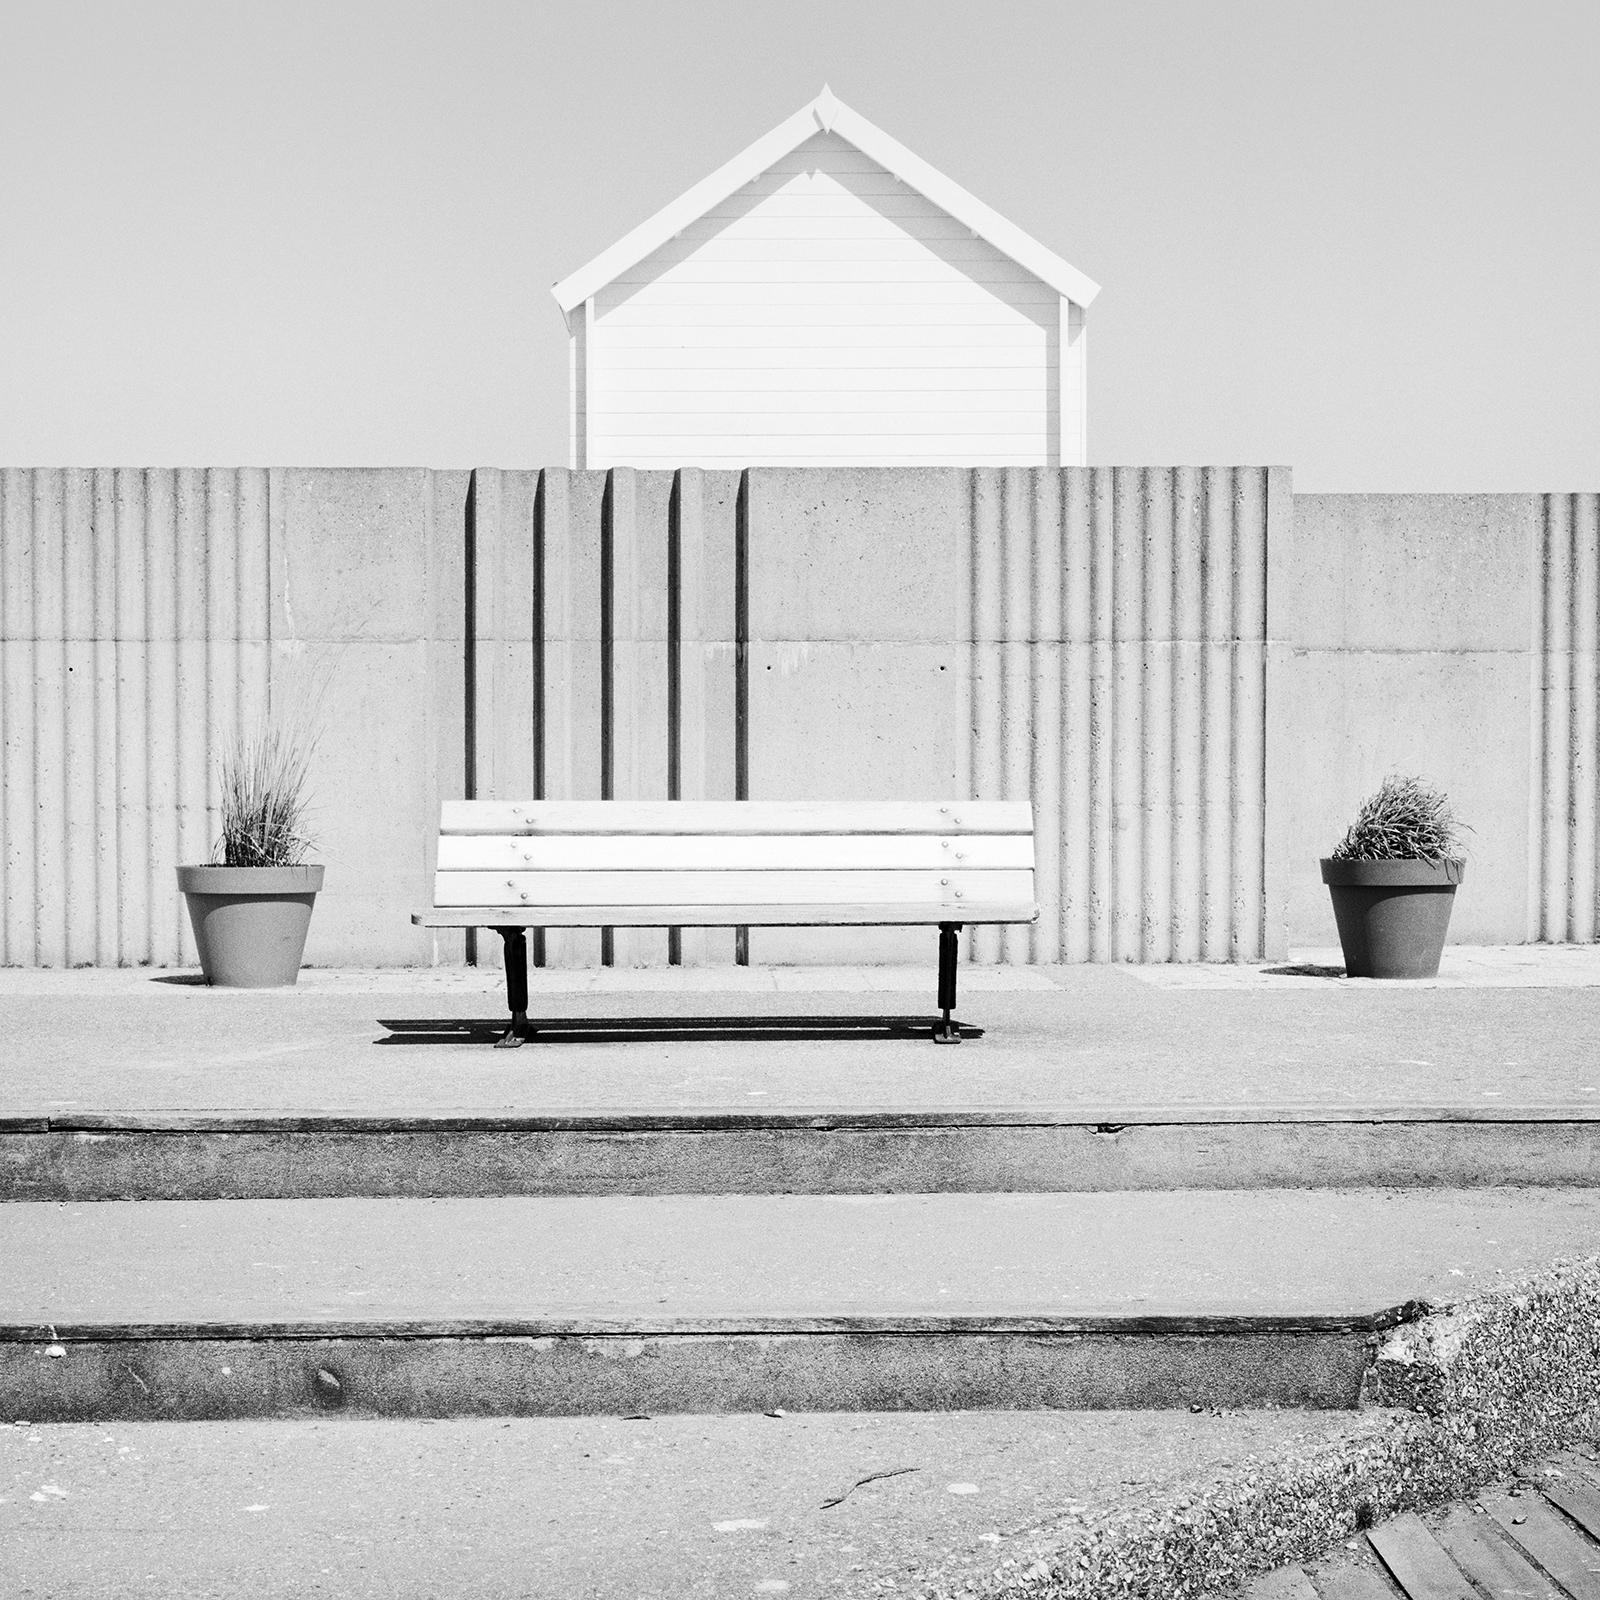 Esplanade, Beach Huts, France, minimalist black and white landscape photography For Sale 1